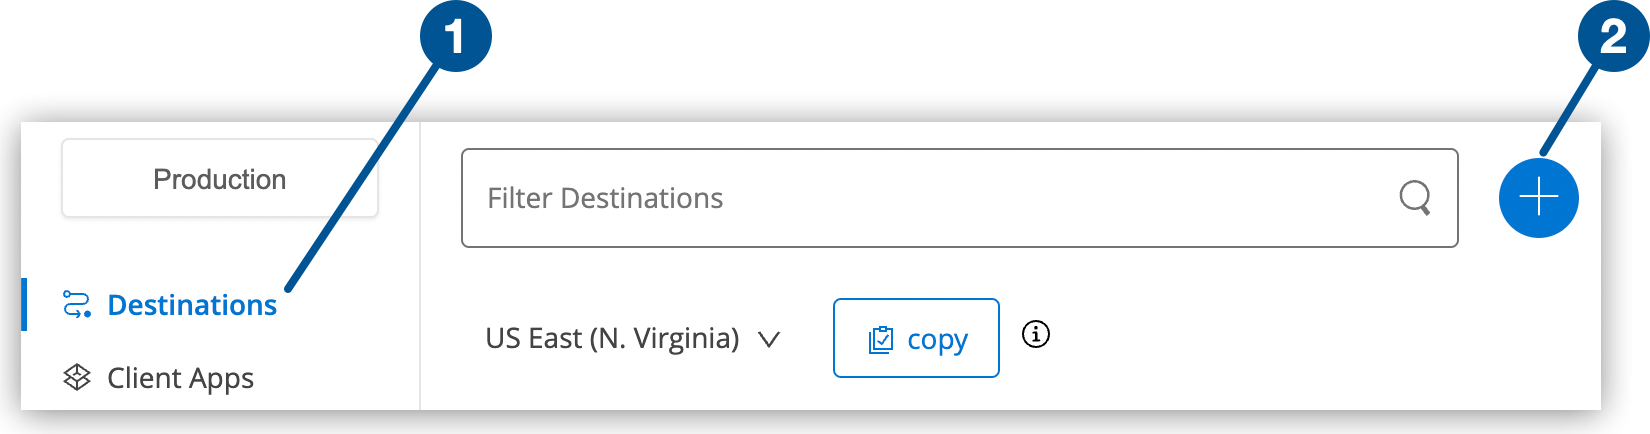 Destinations option and the blue plus icon